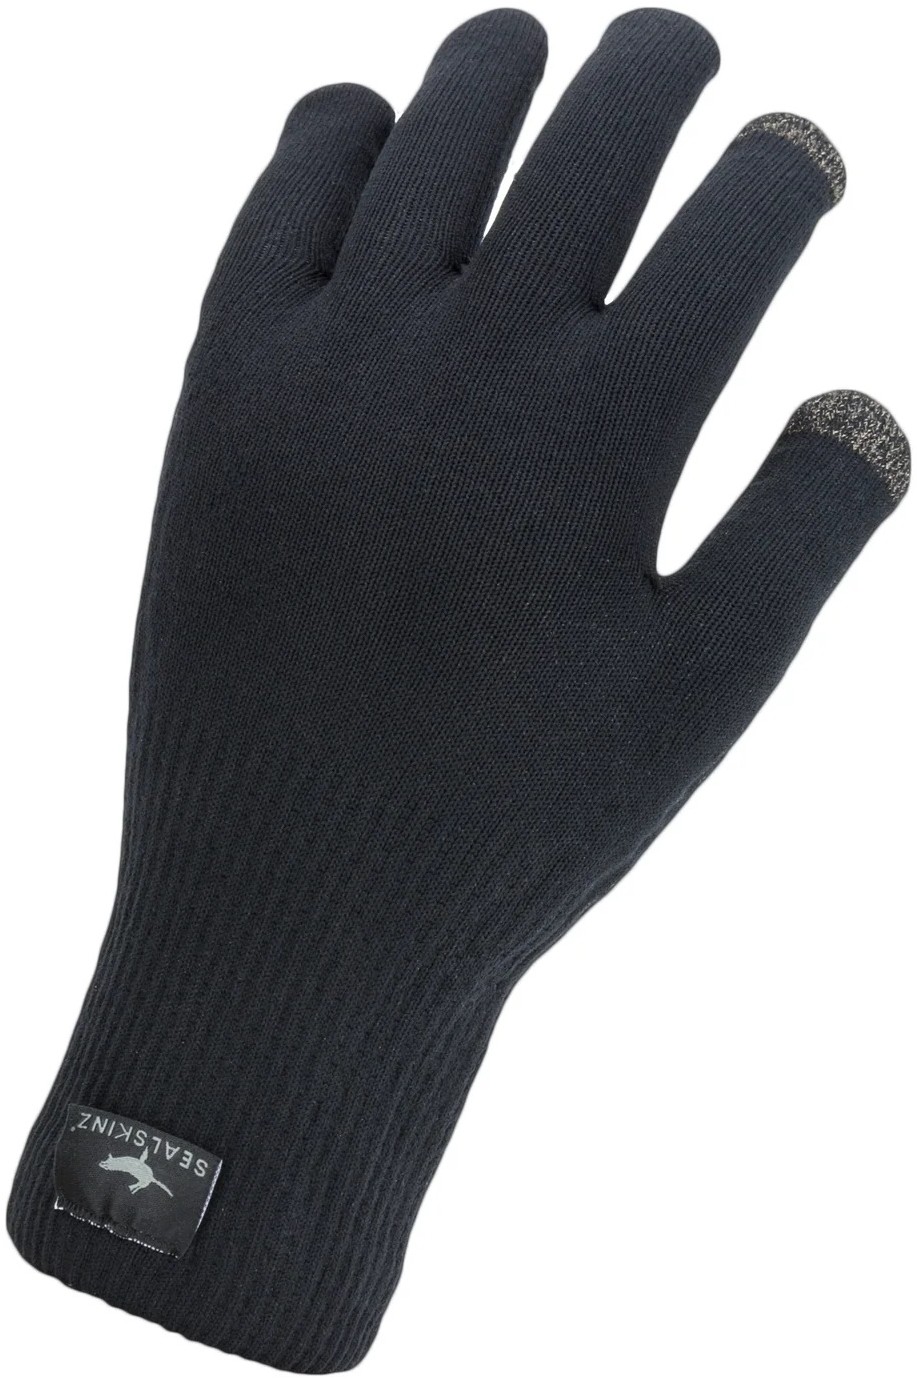 Anmer Waterproof All Weather Ultra Grip Knitted Long Finger Gloves image 0